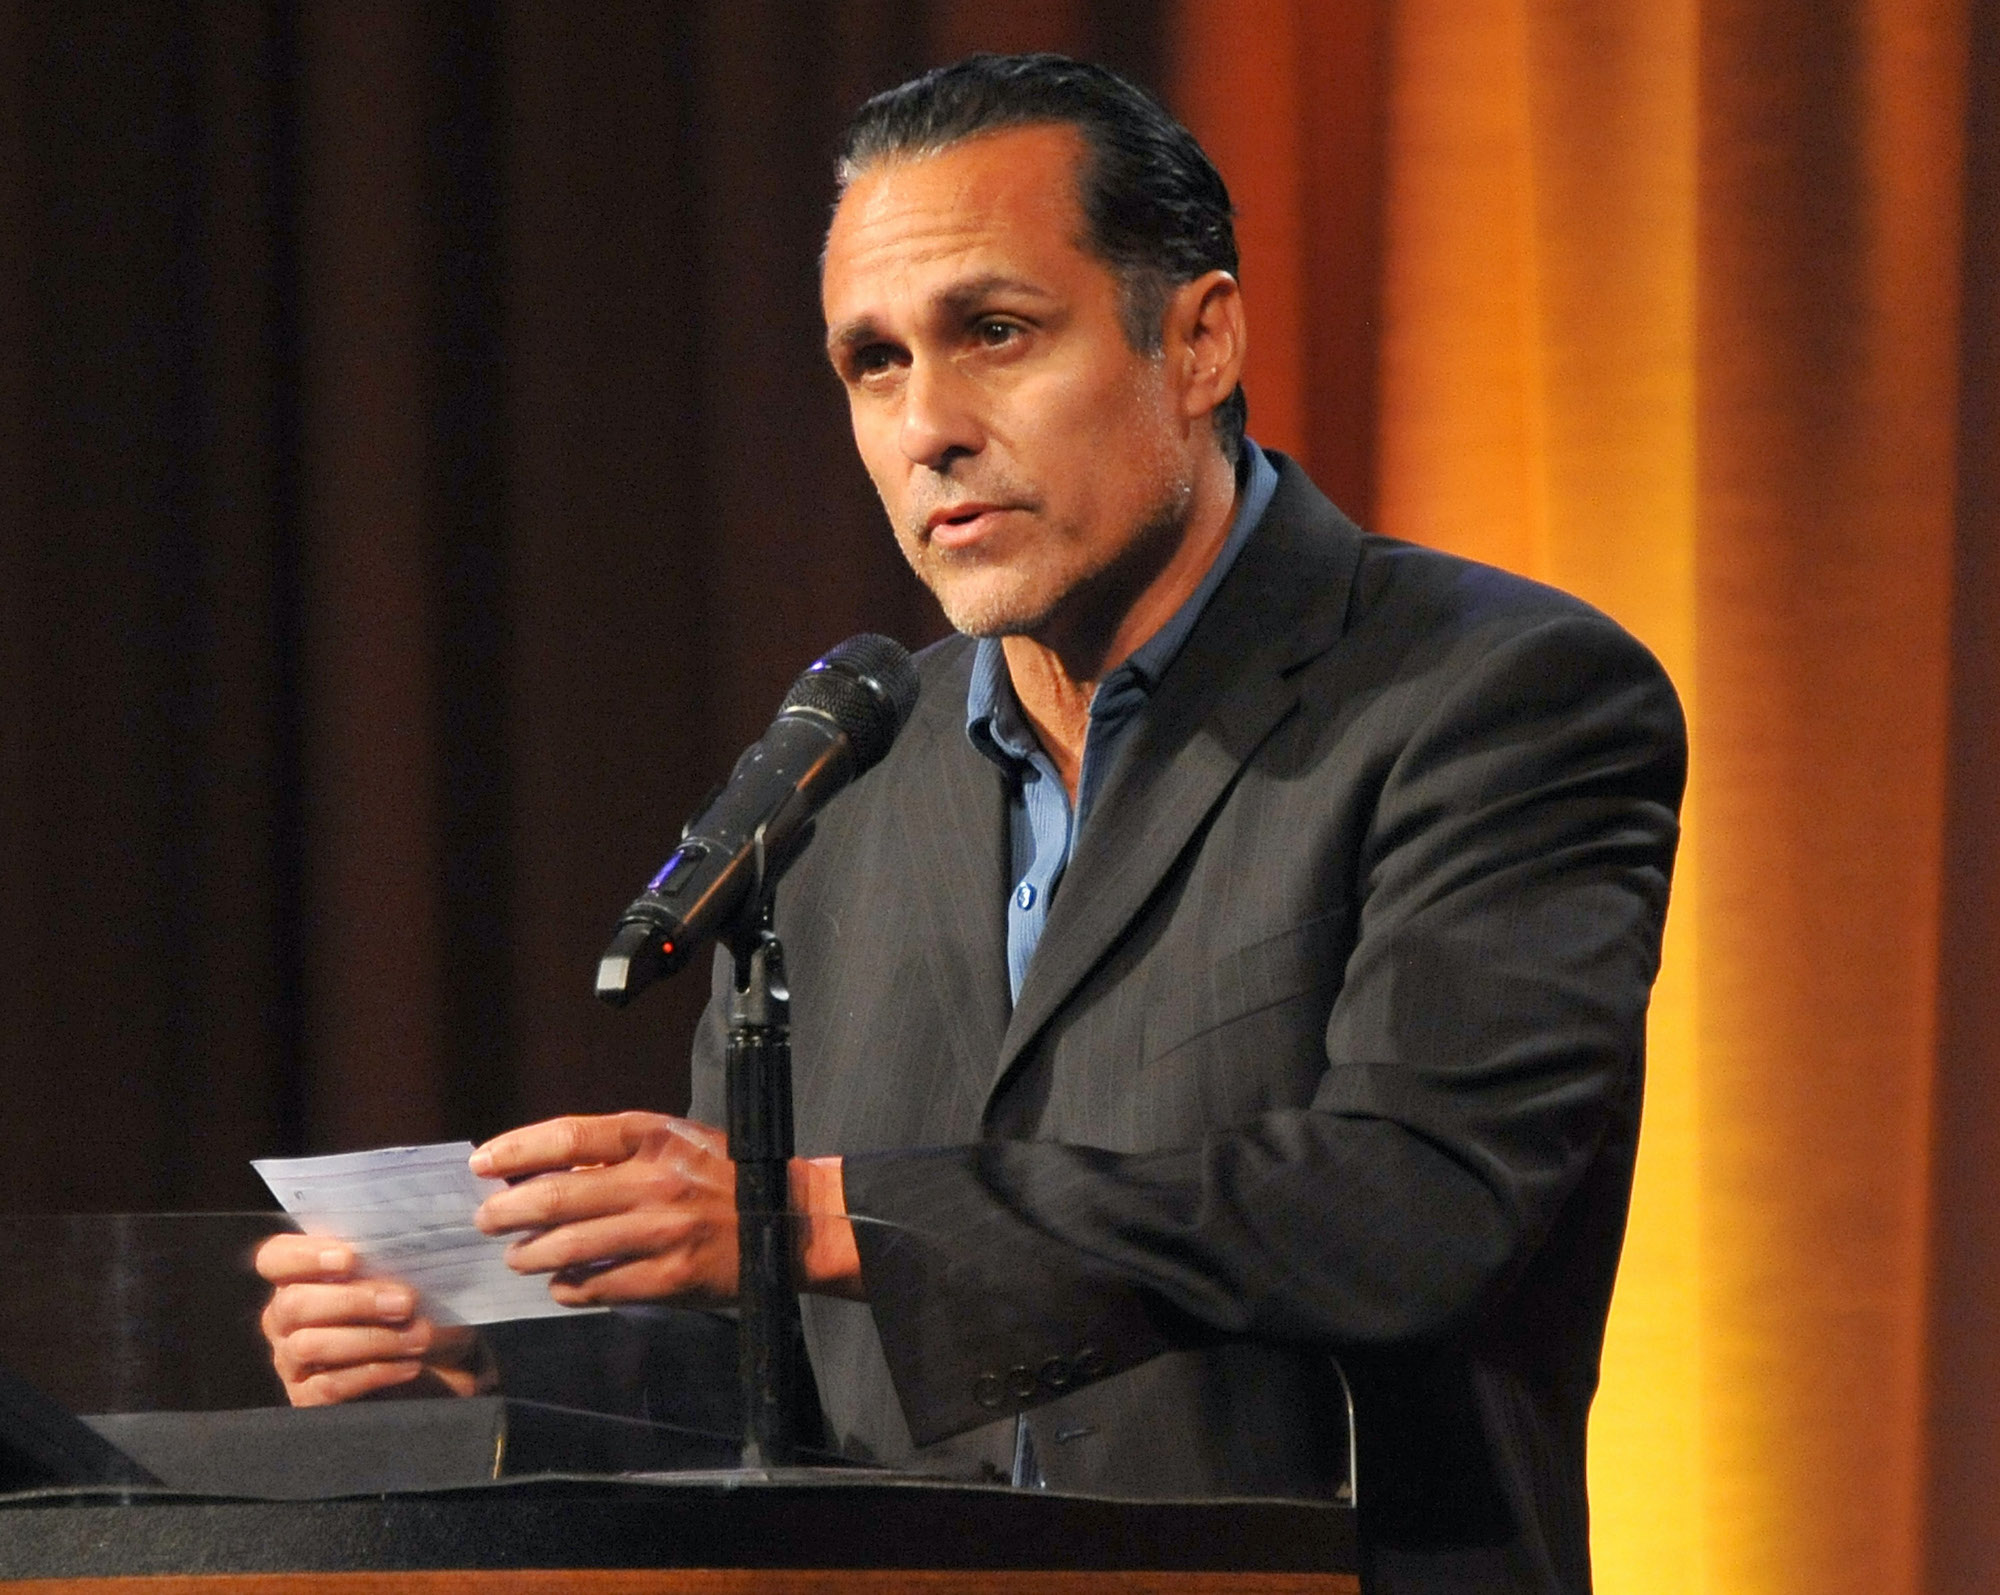 ‘General Hospital’ Actor Maurice Benard and His Wife Adopted His Teenage Sister-In-Law After Her Mother’s Sudden Death